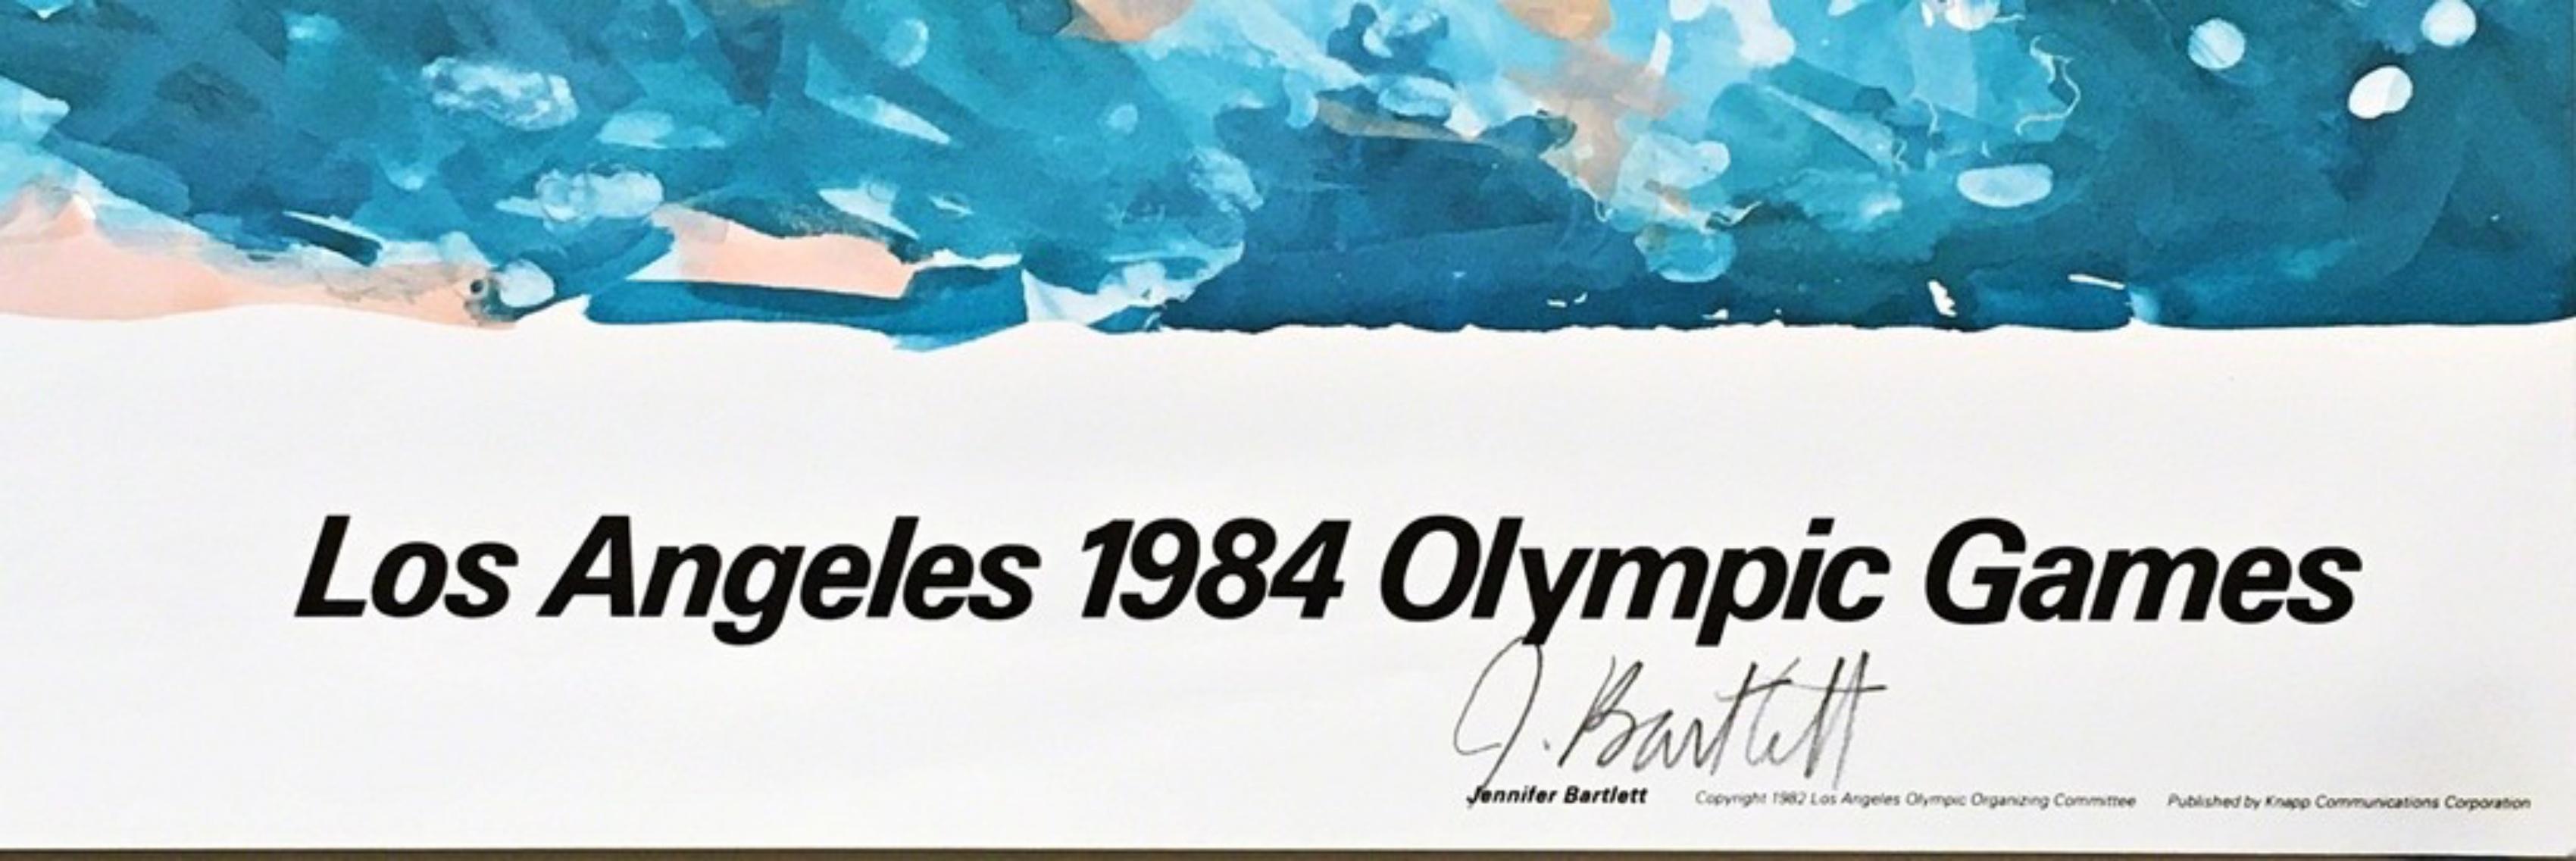 Los Angeles 1984 Olympic Games (Hand Signed with Olympic Committee COA), 1982  - Print by Jennifer Bartlett